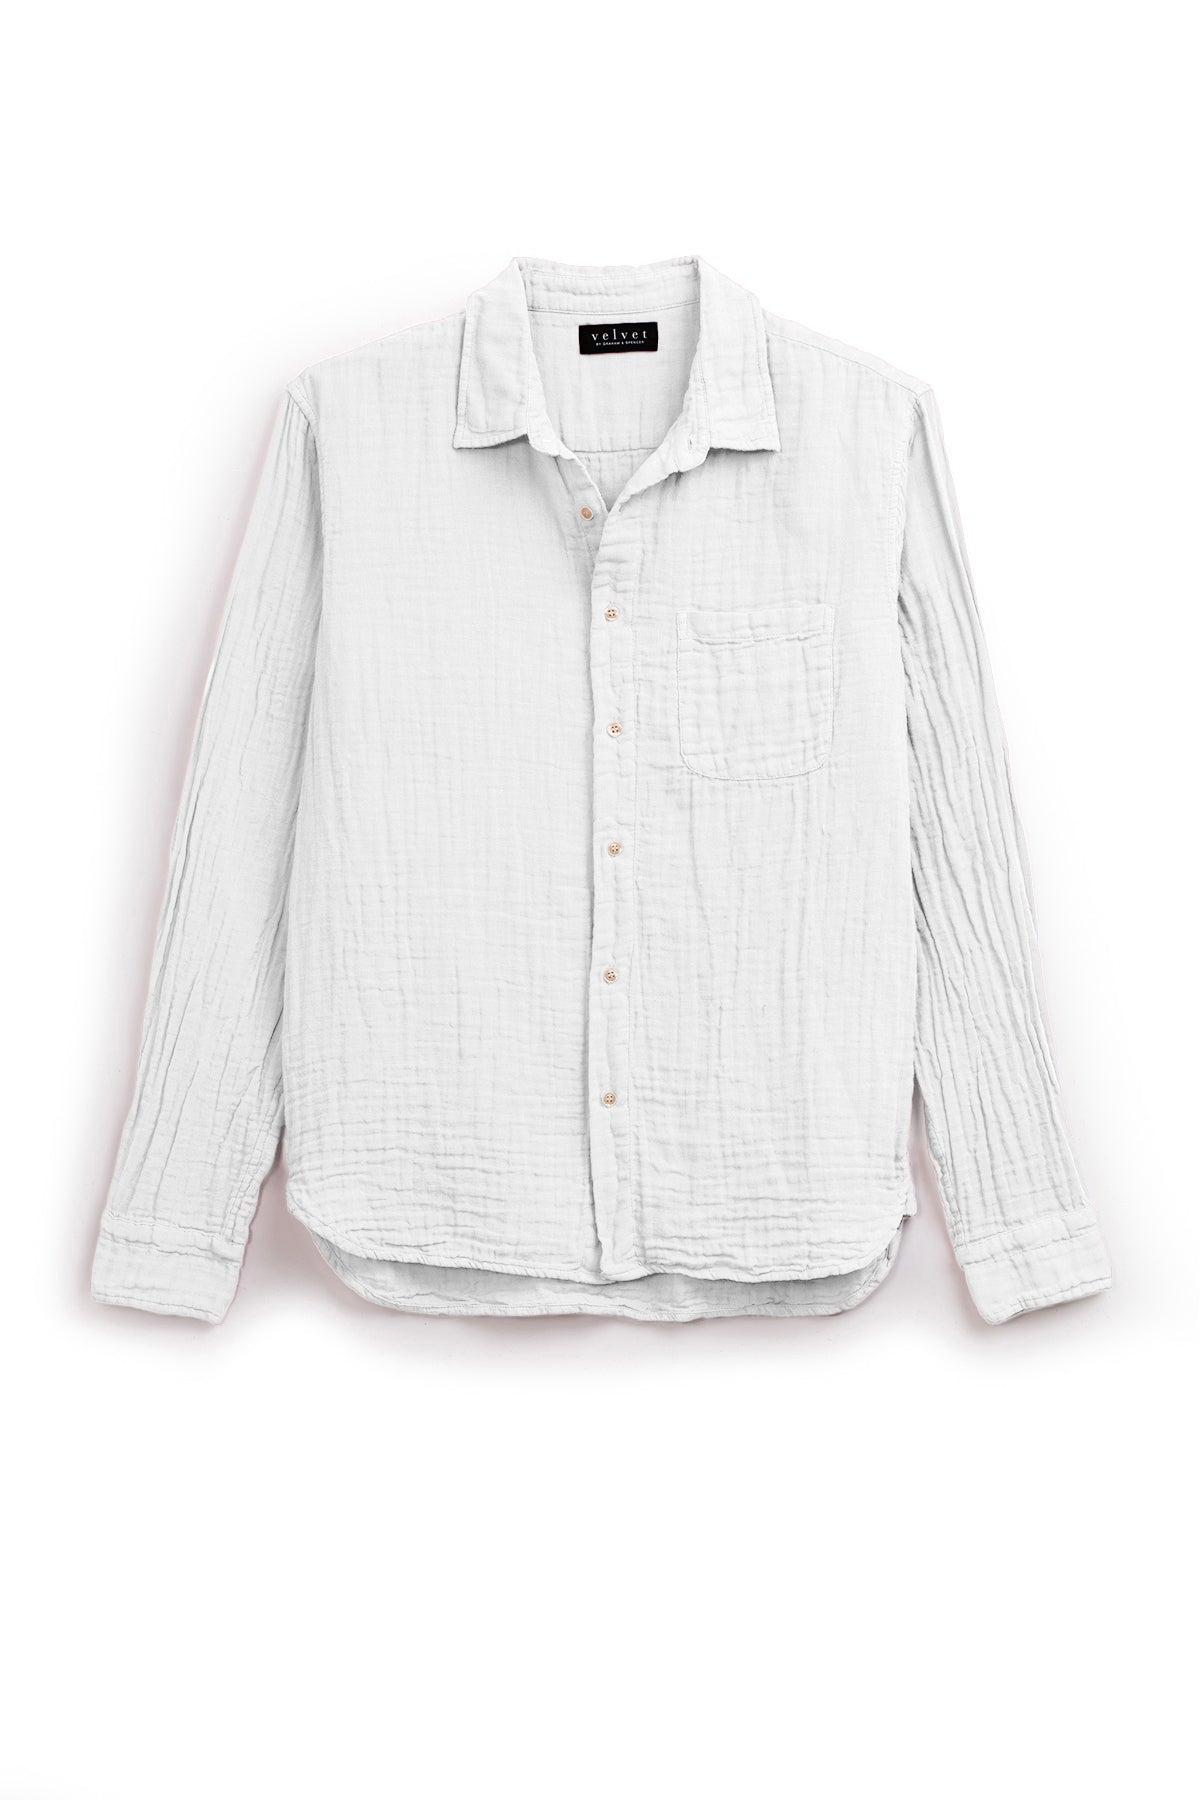   White ELTON COTTON GAUZE BUTTON-UP SHIRT with a chest pocket, displayed flat on a plain background by Velvet by Graham & Spencer. 